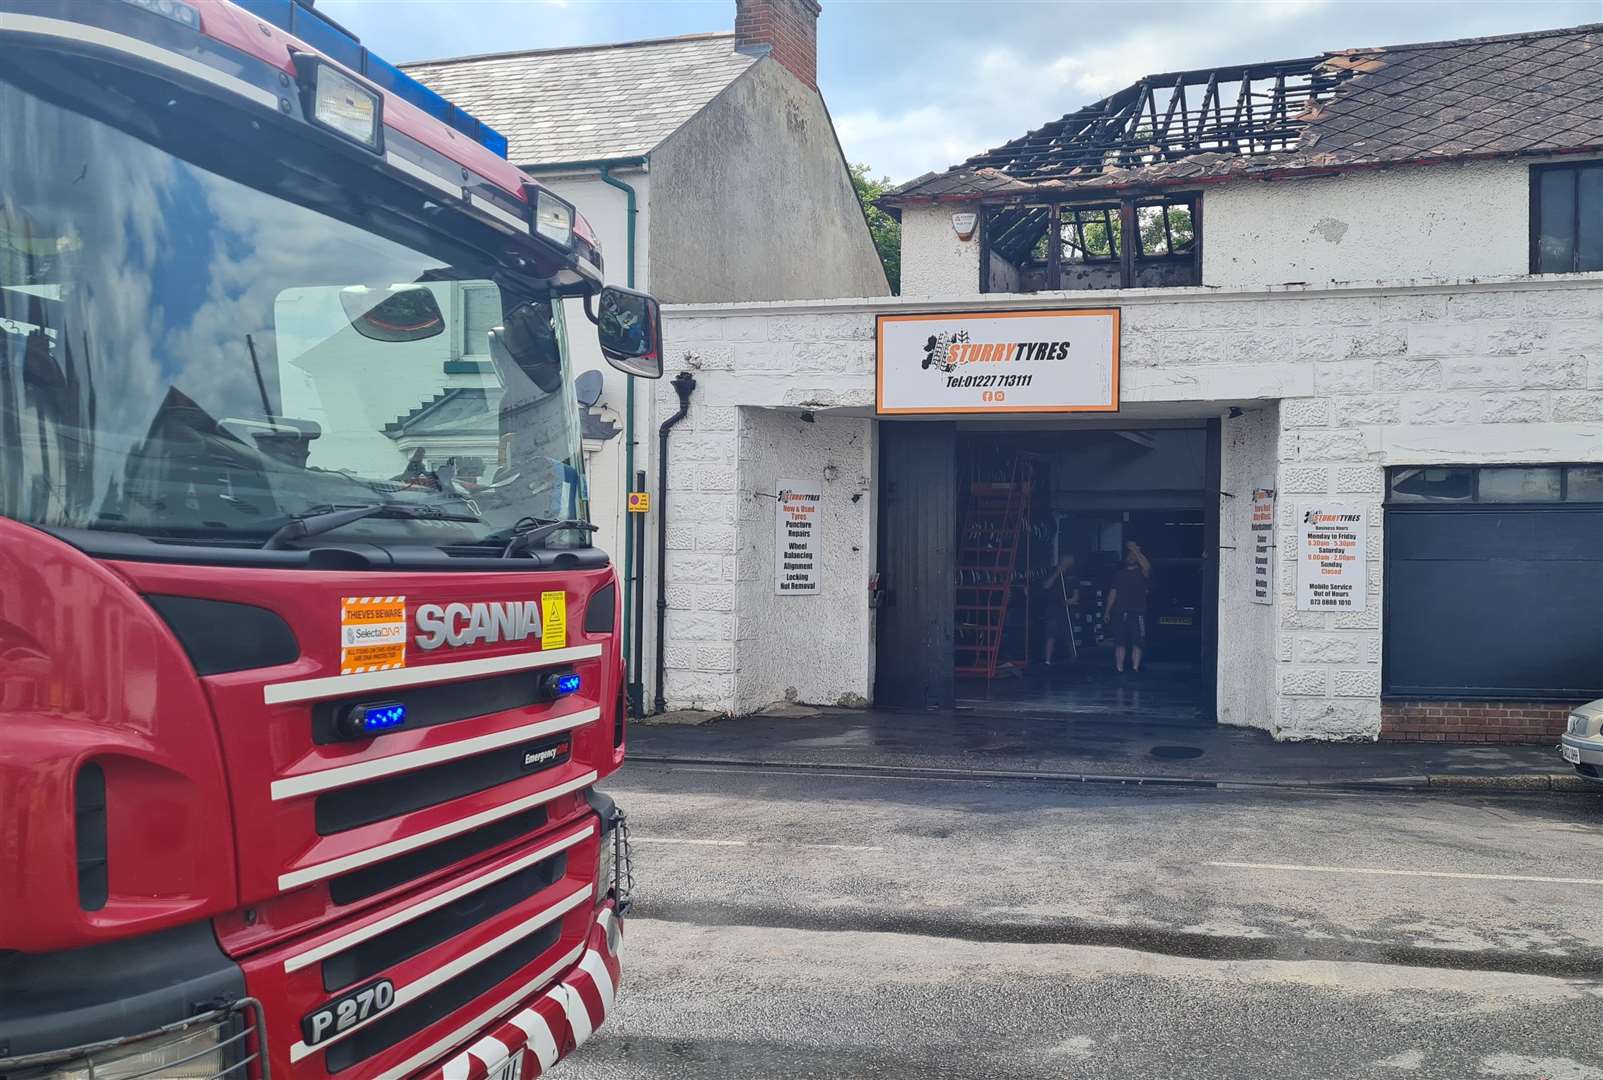 The roof at Sturry Tyres near Canterbury has been damaged following the fire